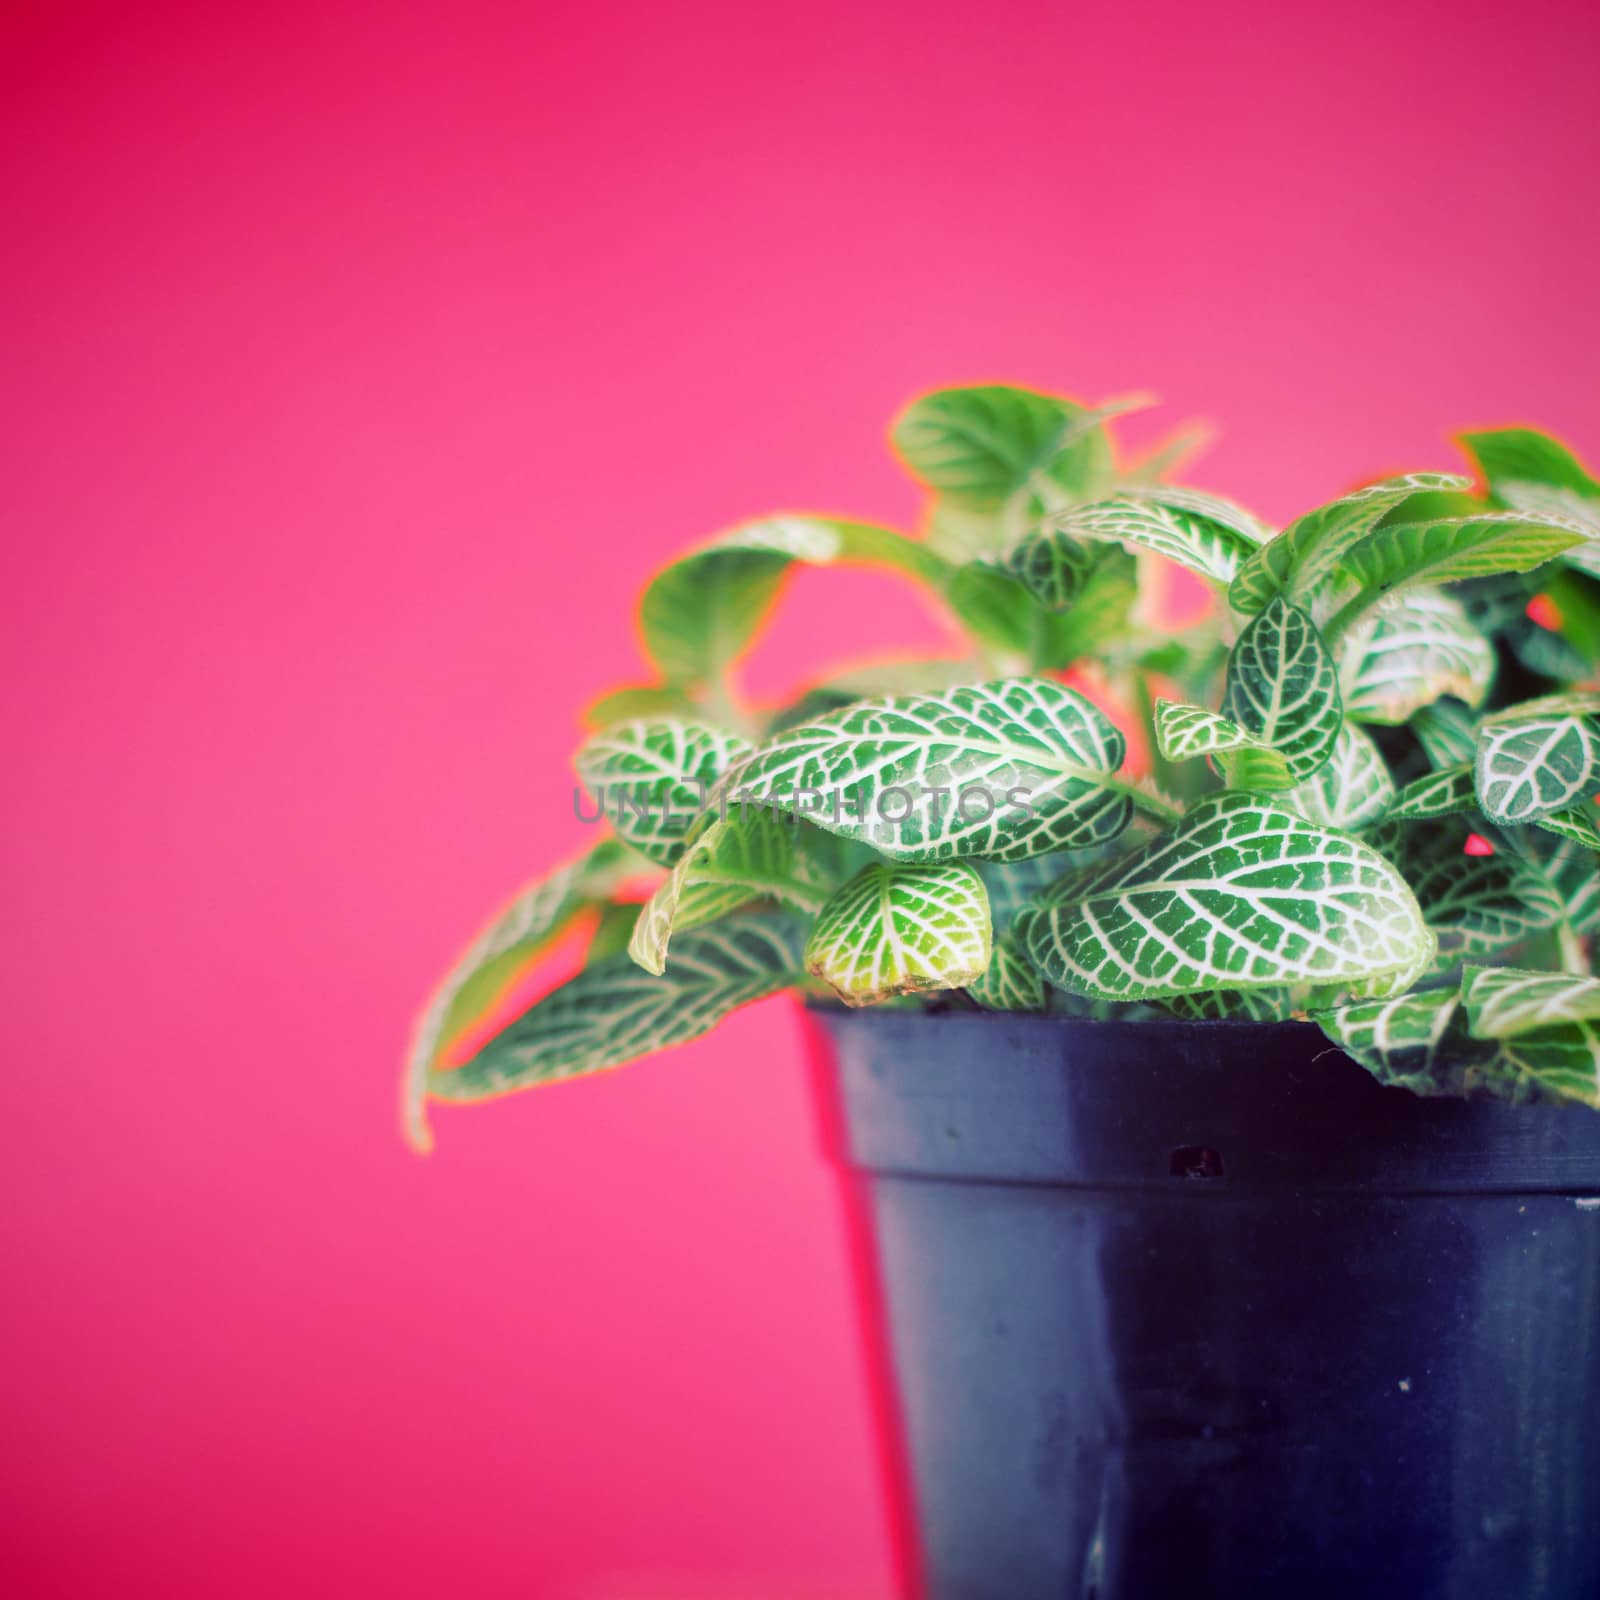 Green plant on red background with retro filter effect by nuchylee